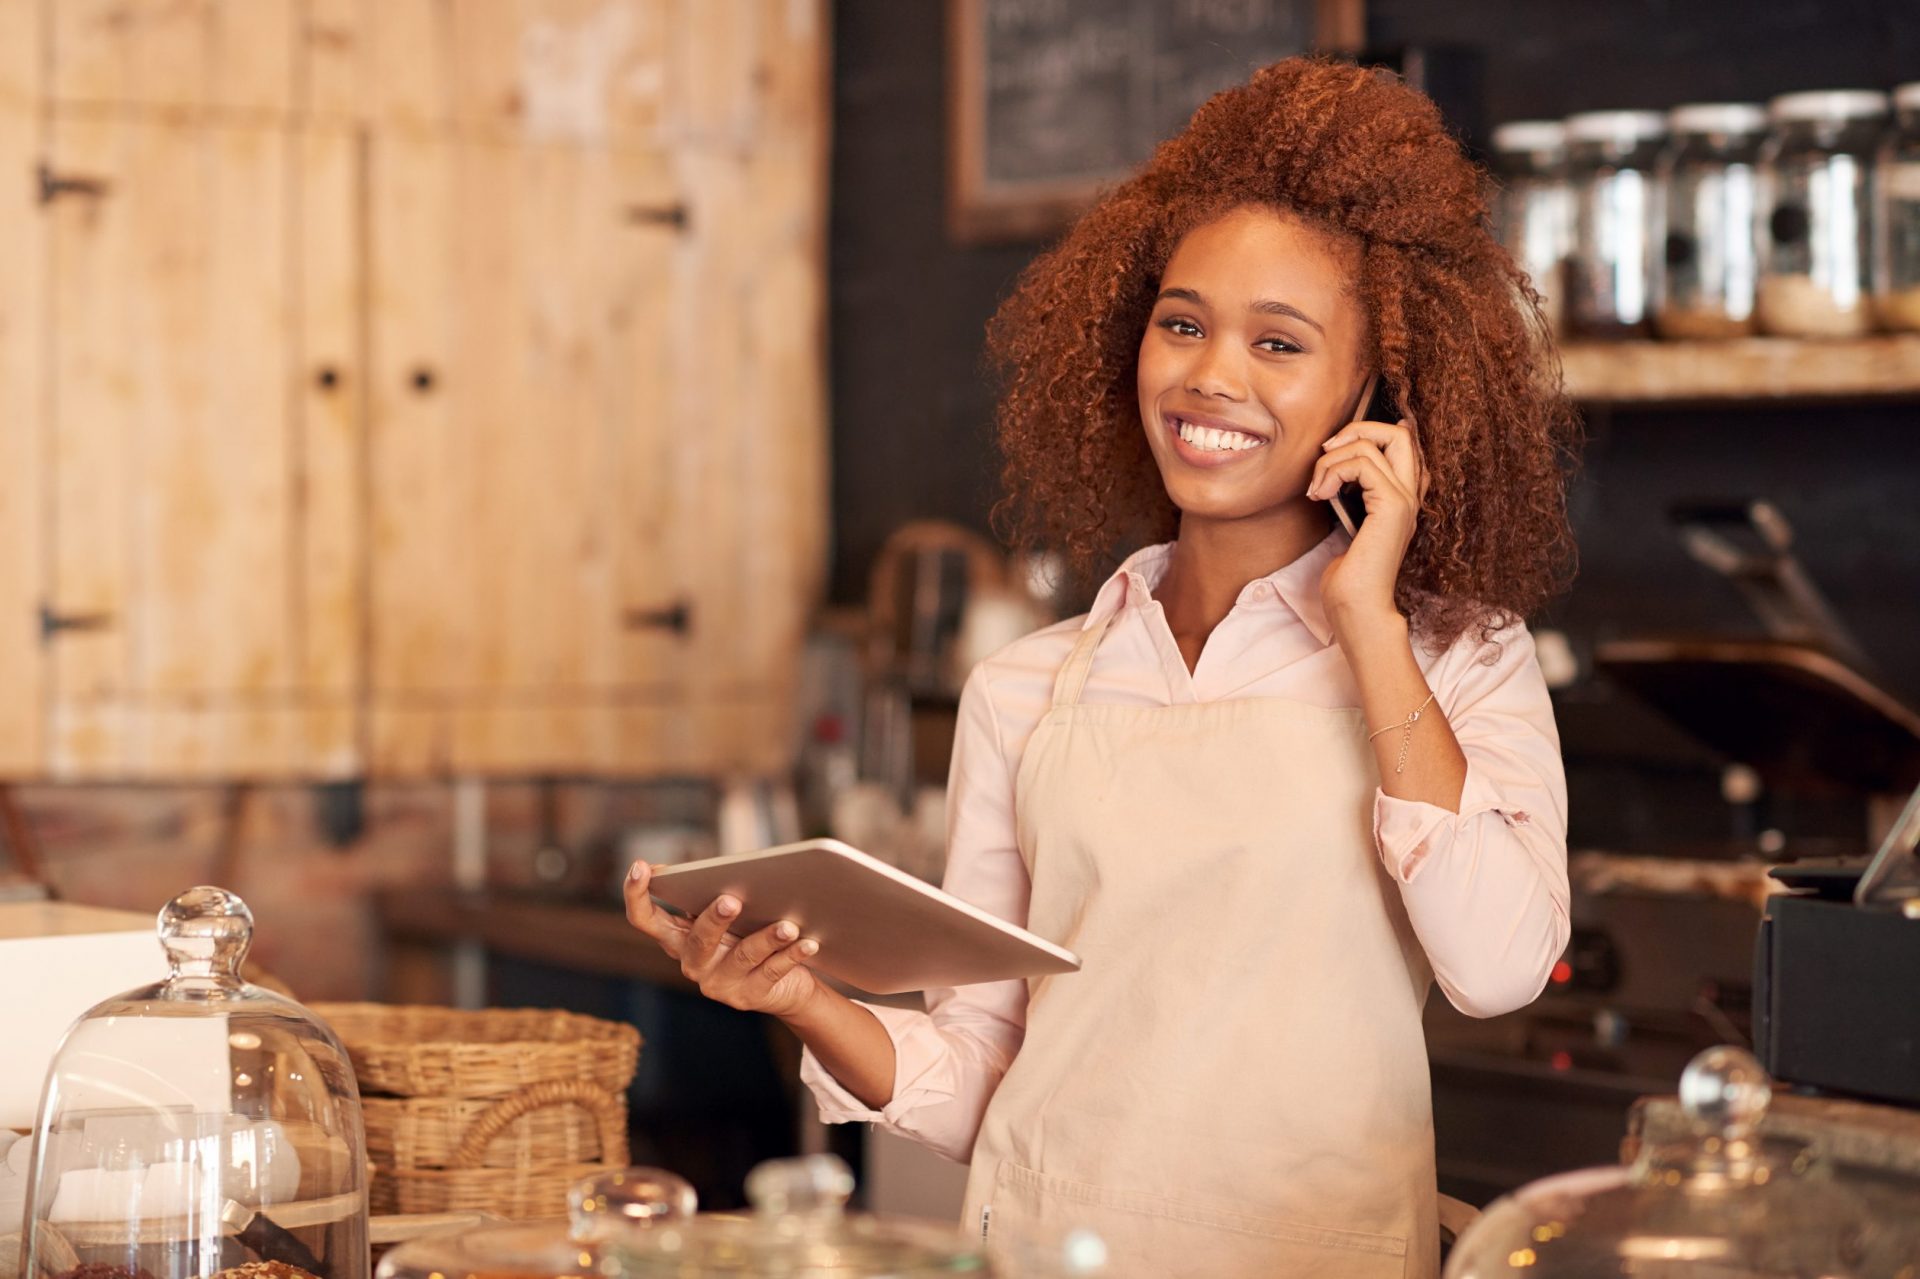 Small Business Connectivity - woman ordering cafe supplies